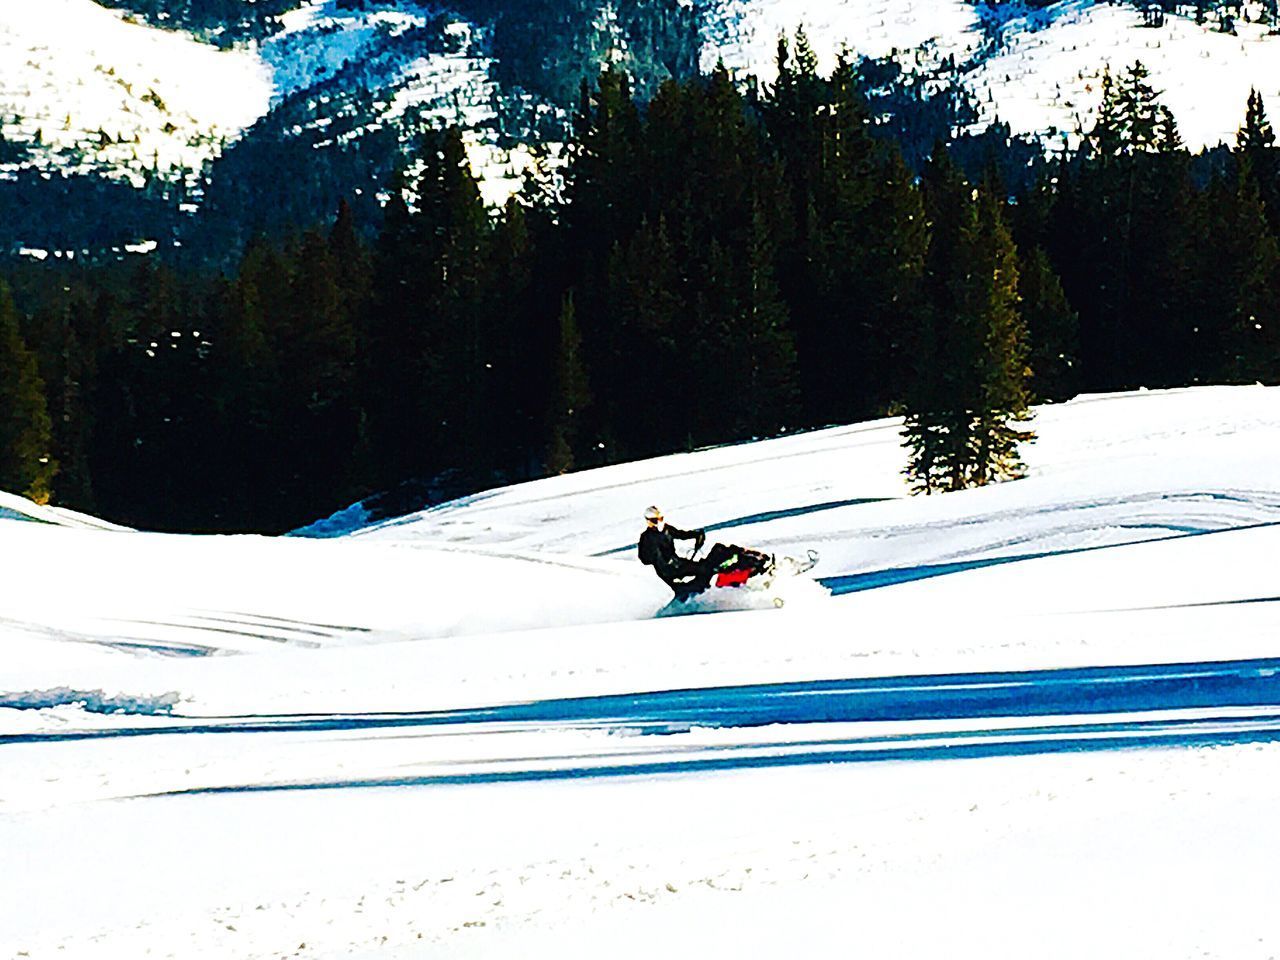 MAN RIDING MOTORCYCLE ON SNOW COVERED FIELD